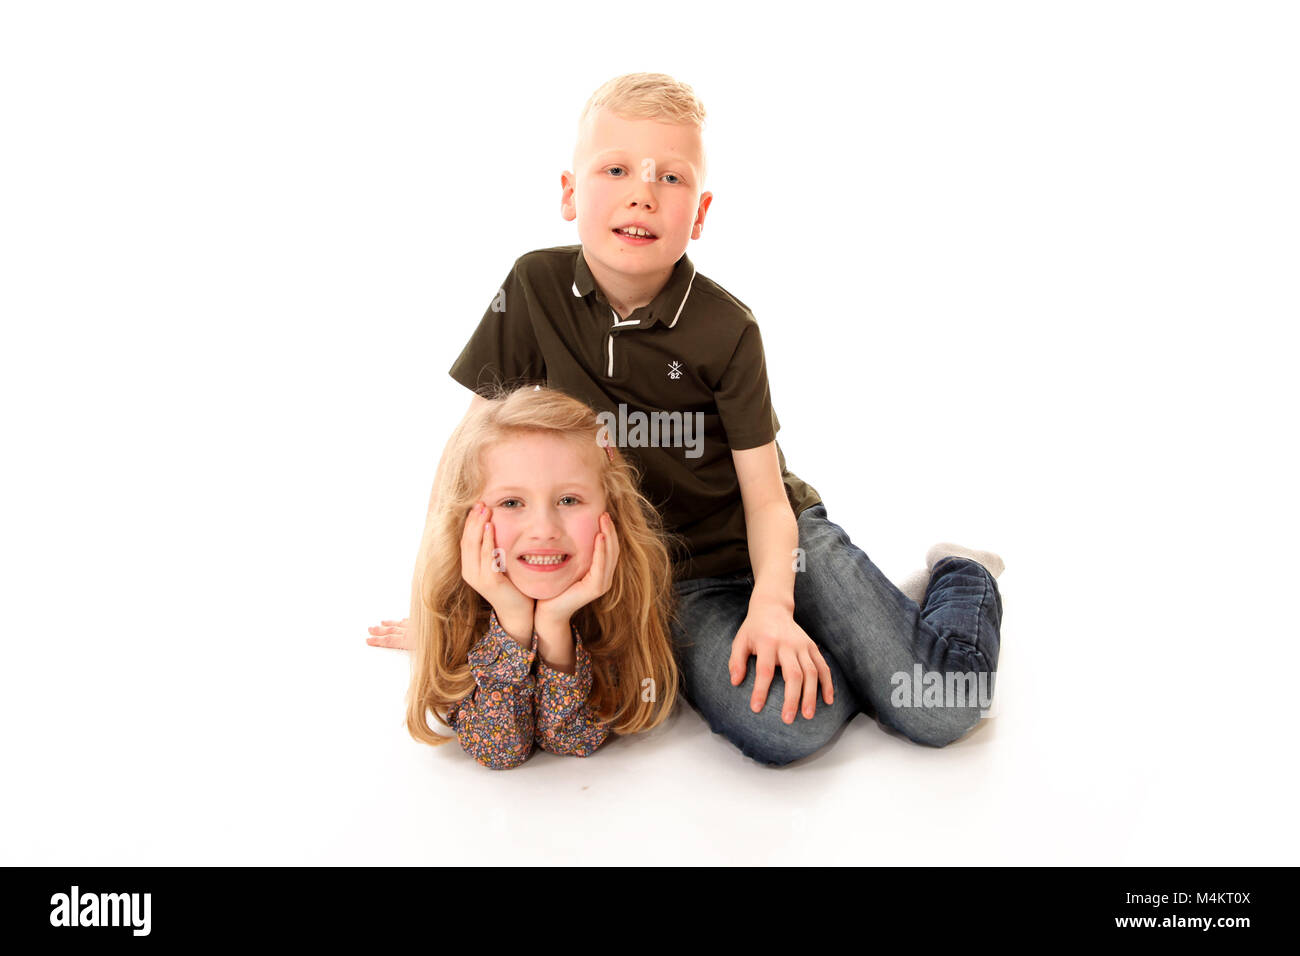 brother and sister, laughing and having fun, happy childhood Stock Photo